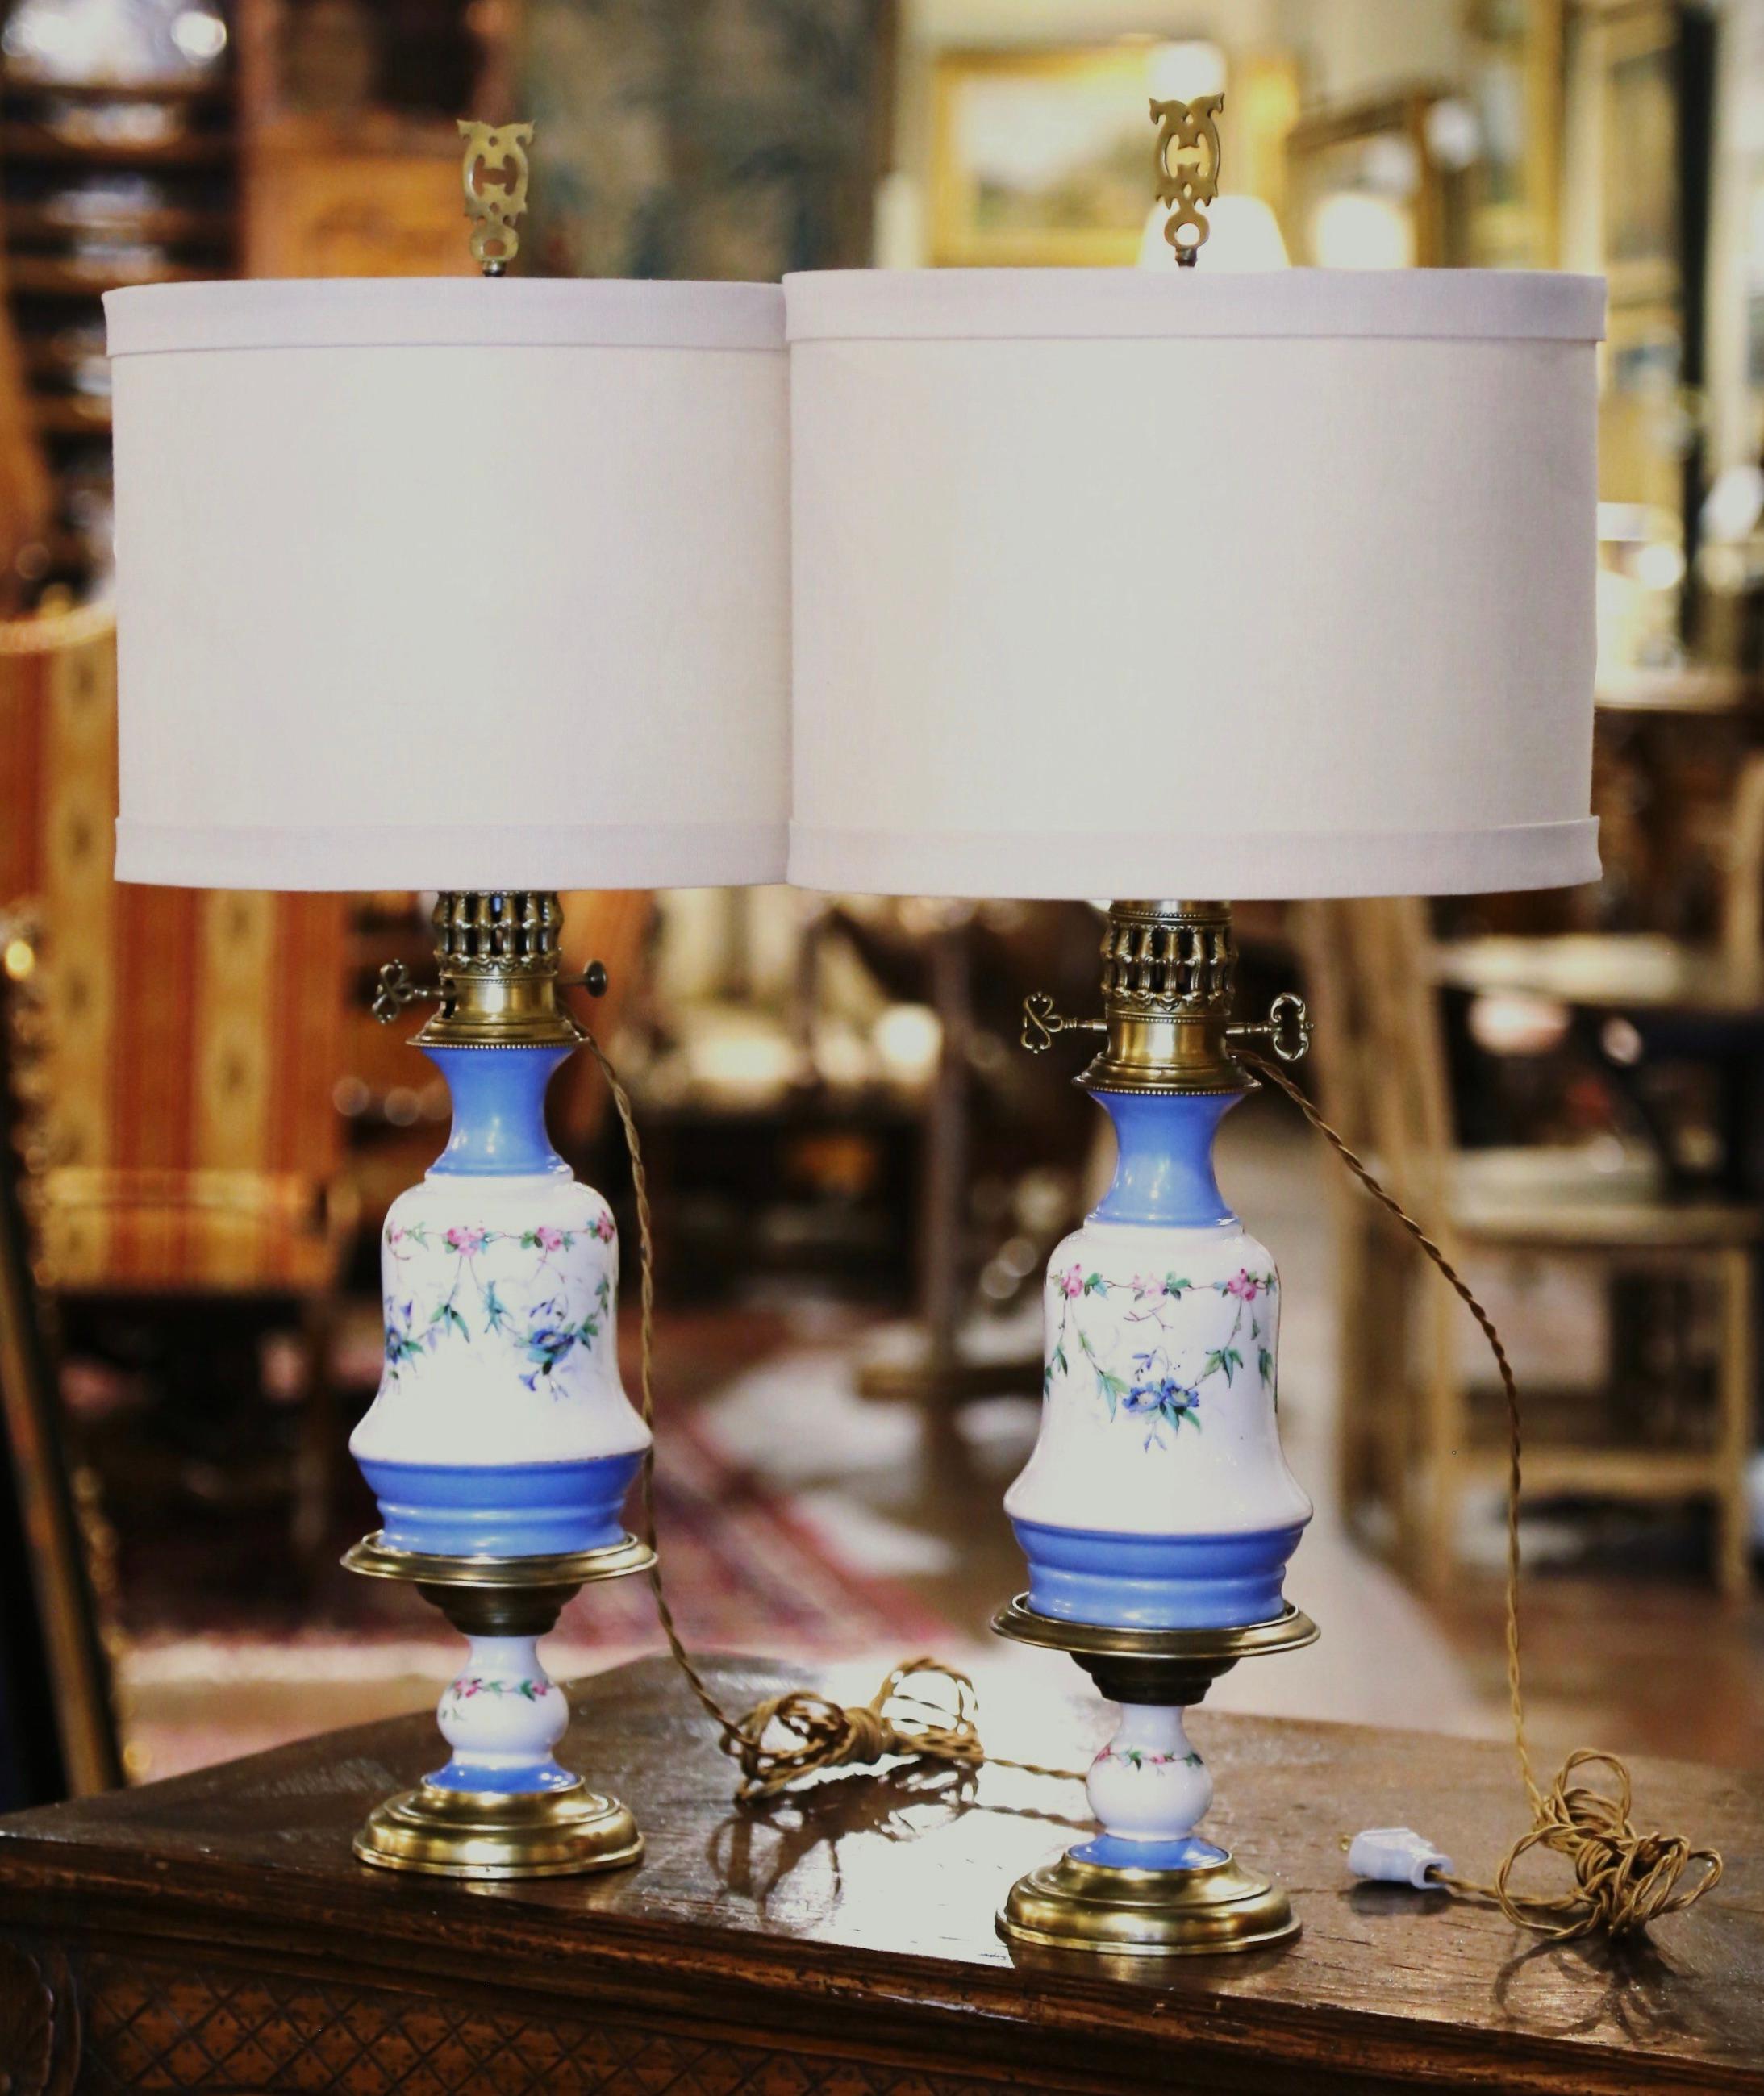 These elegant antique oil lamps were crafted in France, circa 1870. The 